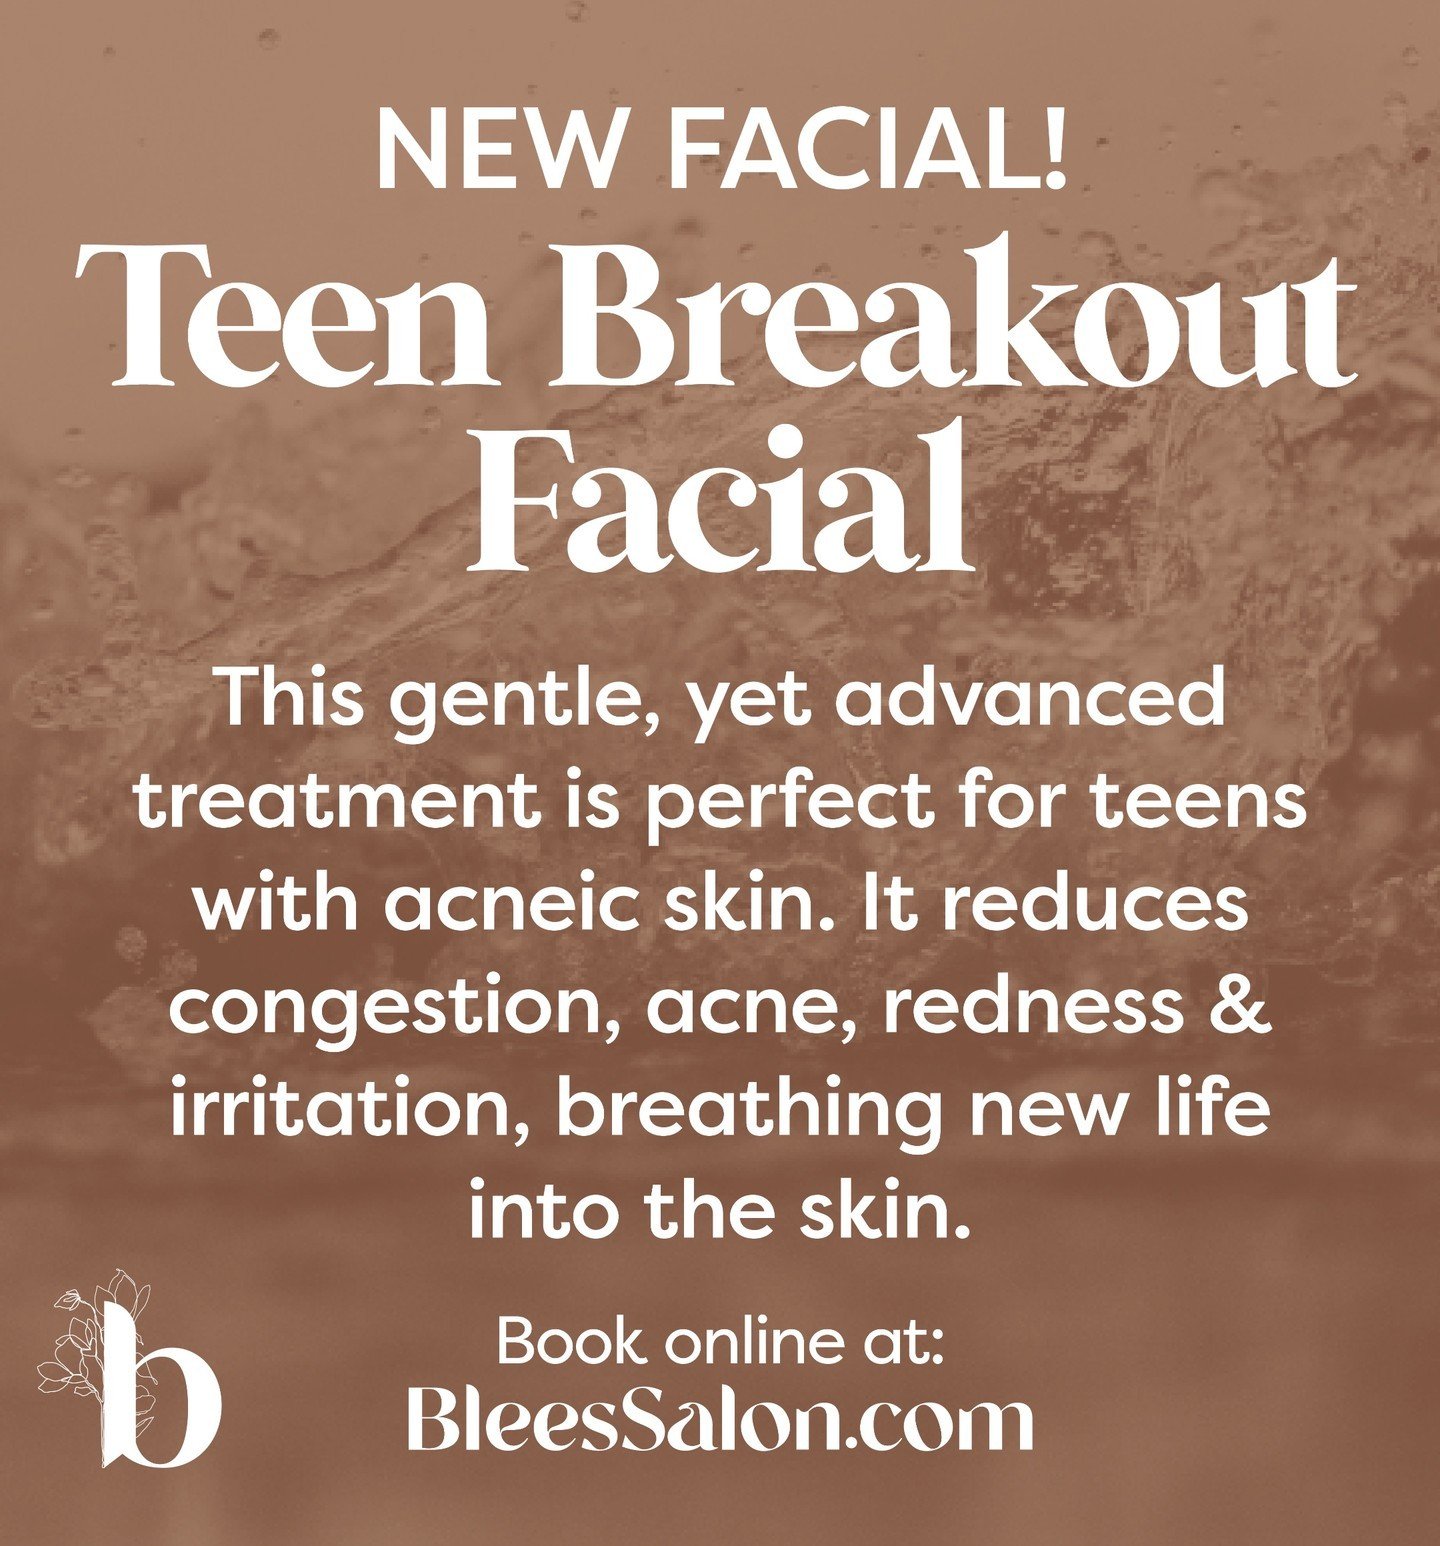 We have a new facial just for teens with acneic skin. This facial has the perfect balance of properties that are calming yet advanced. Book yours online today or give us a call at (518) 585-2557. #esthetician #aesthetician #aestheticianlife #licensed